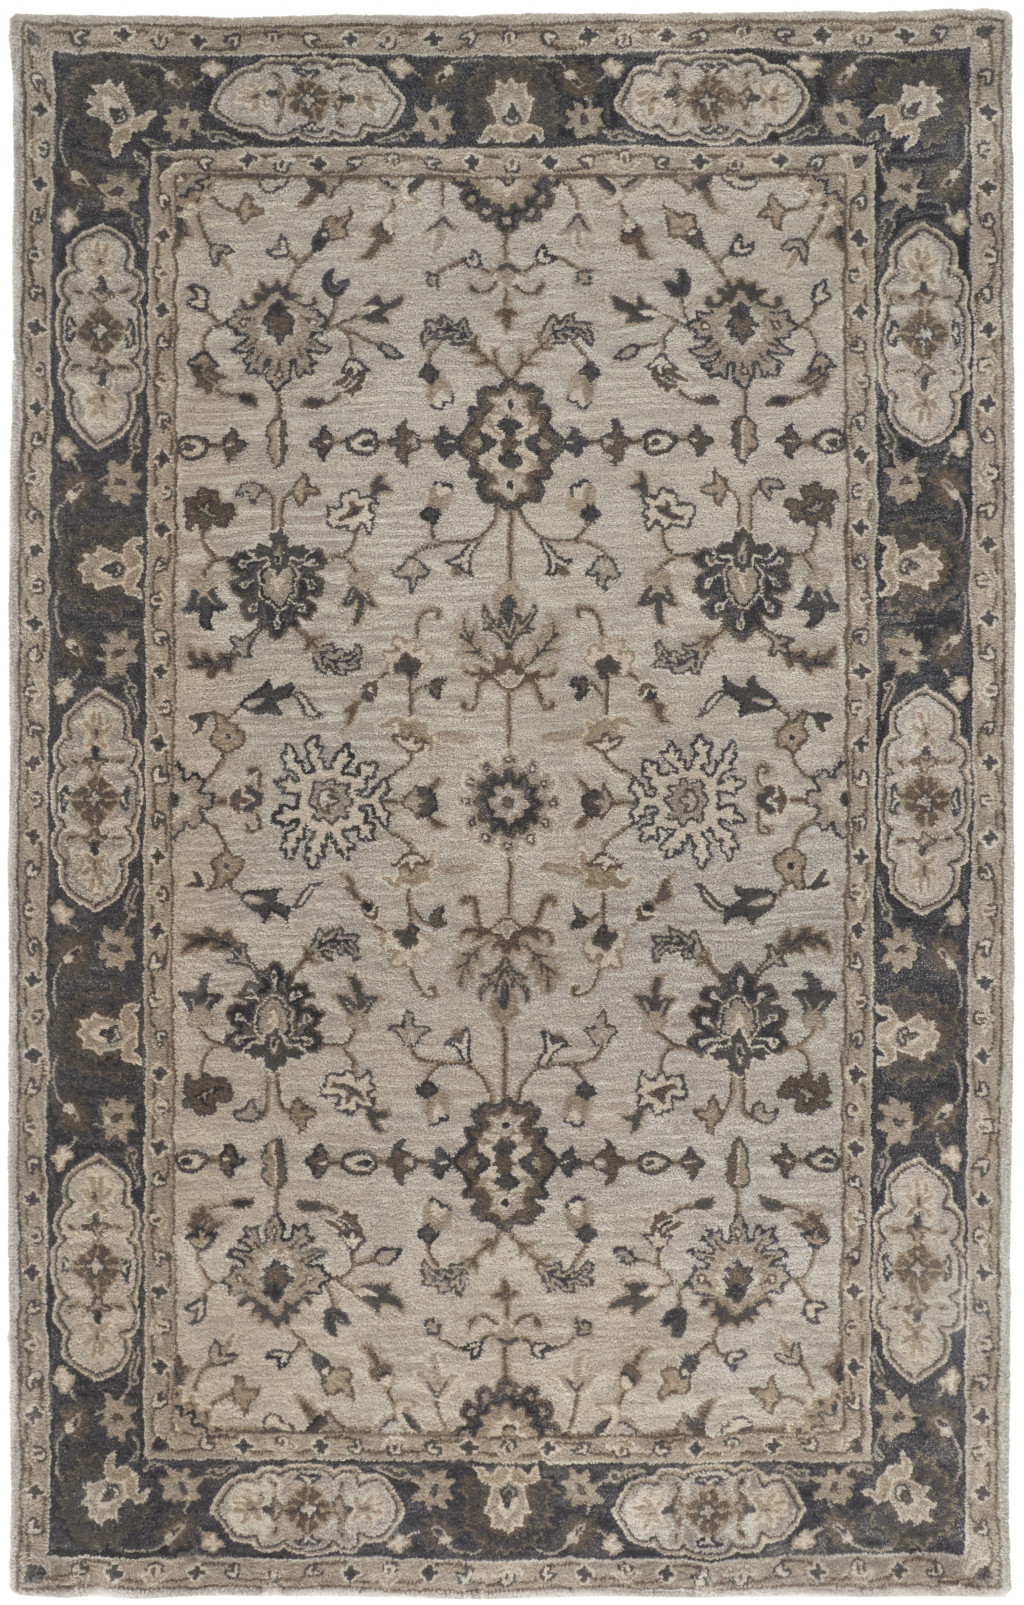 8' X 11' Gray Ivory And Taupe Wool Floral Tufted Handmade Stain Resistant Area Rug-511274-1